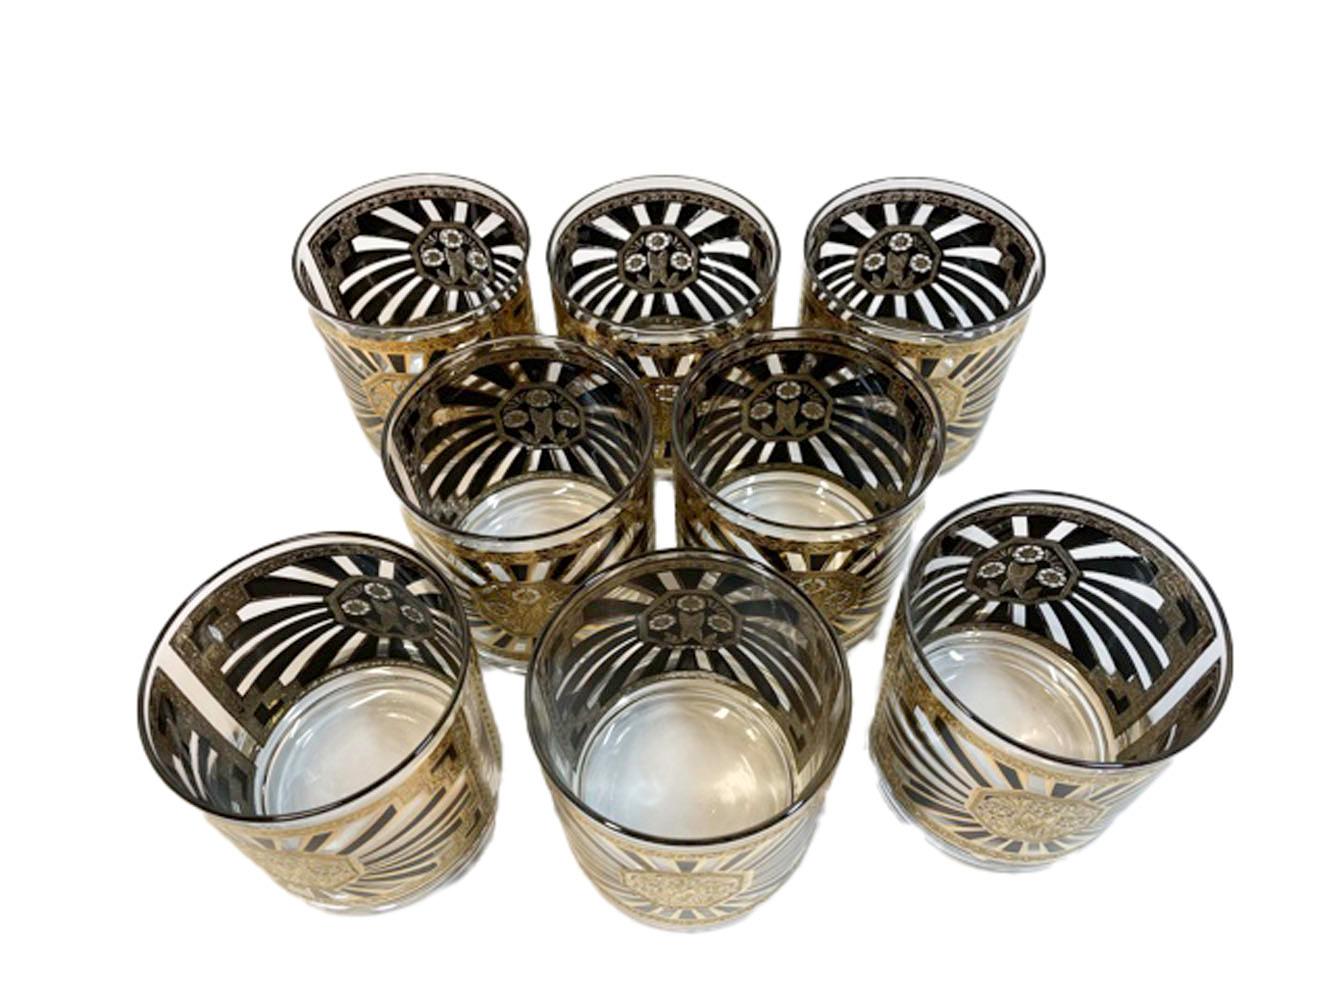 Mid-Century Modern, set of 8 rocks glasses designed by Georges Briard in the Art Deco pattern of classic motifs executed in black enamel and 22k gold with platinum details.